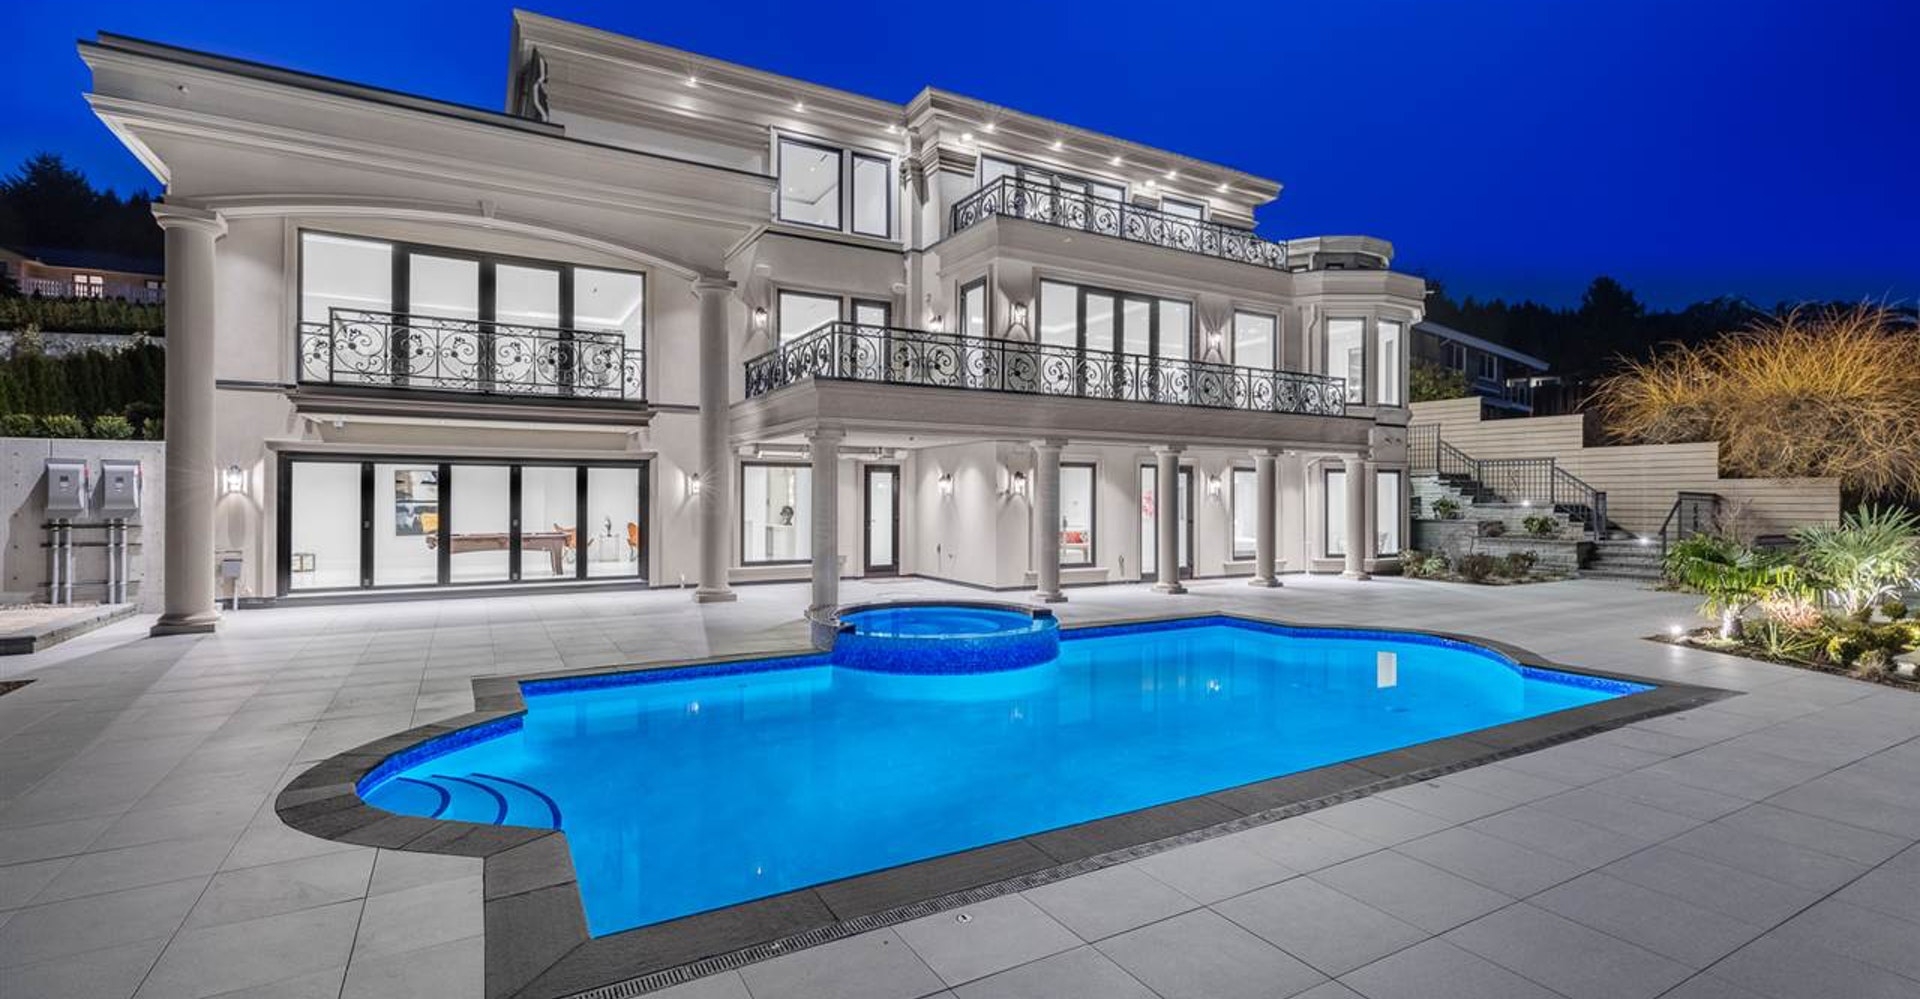 Take a peek inside five of Vancouver's most Instagram-worthy homes (PHOTOS)